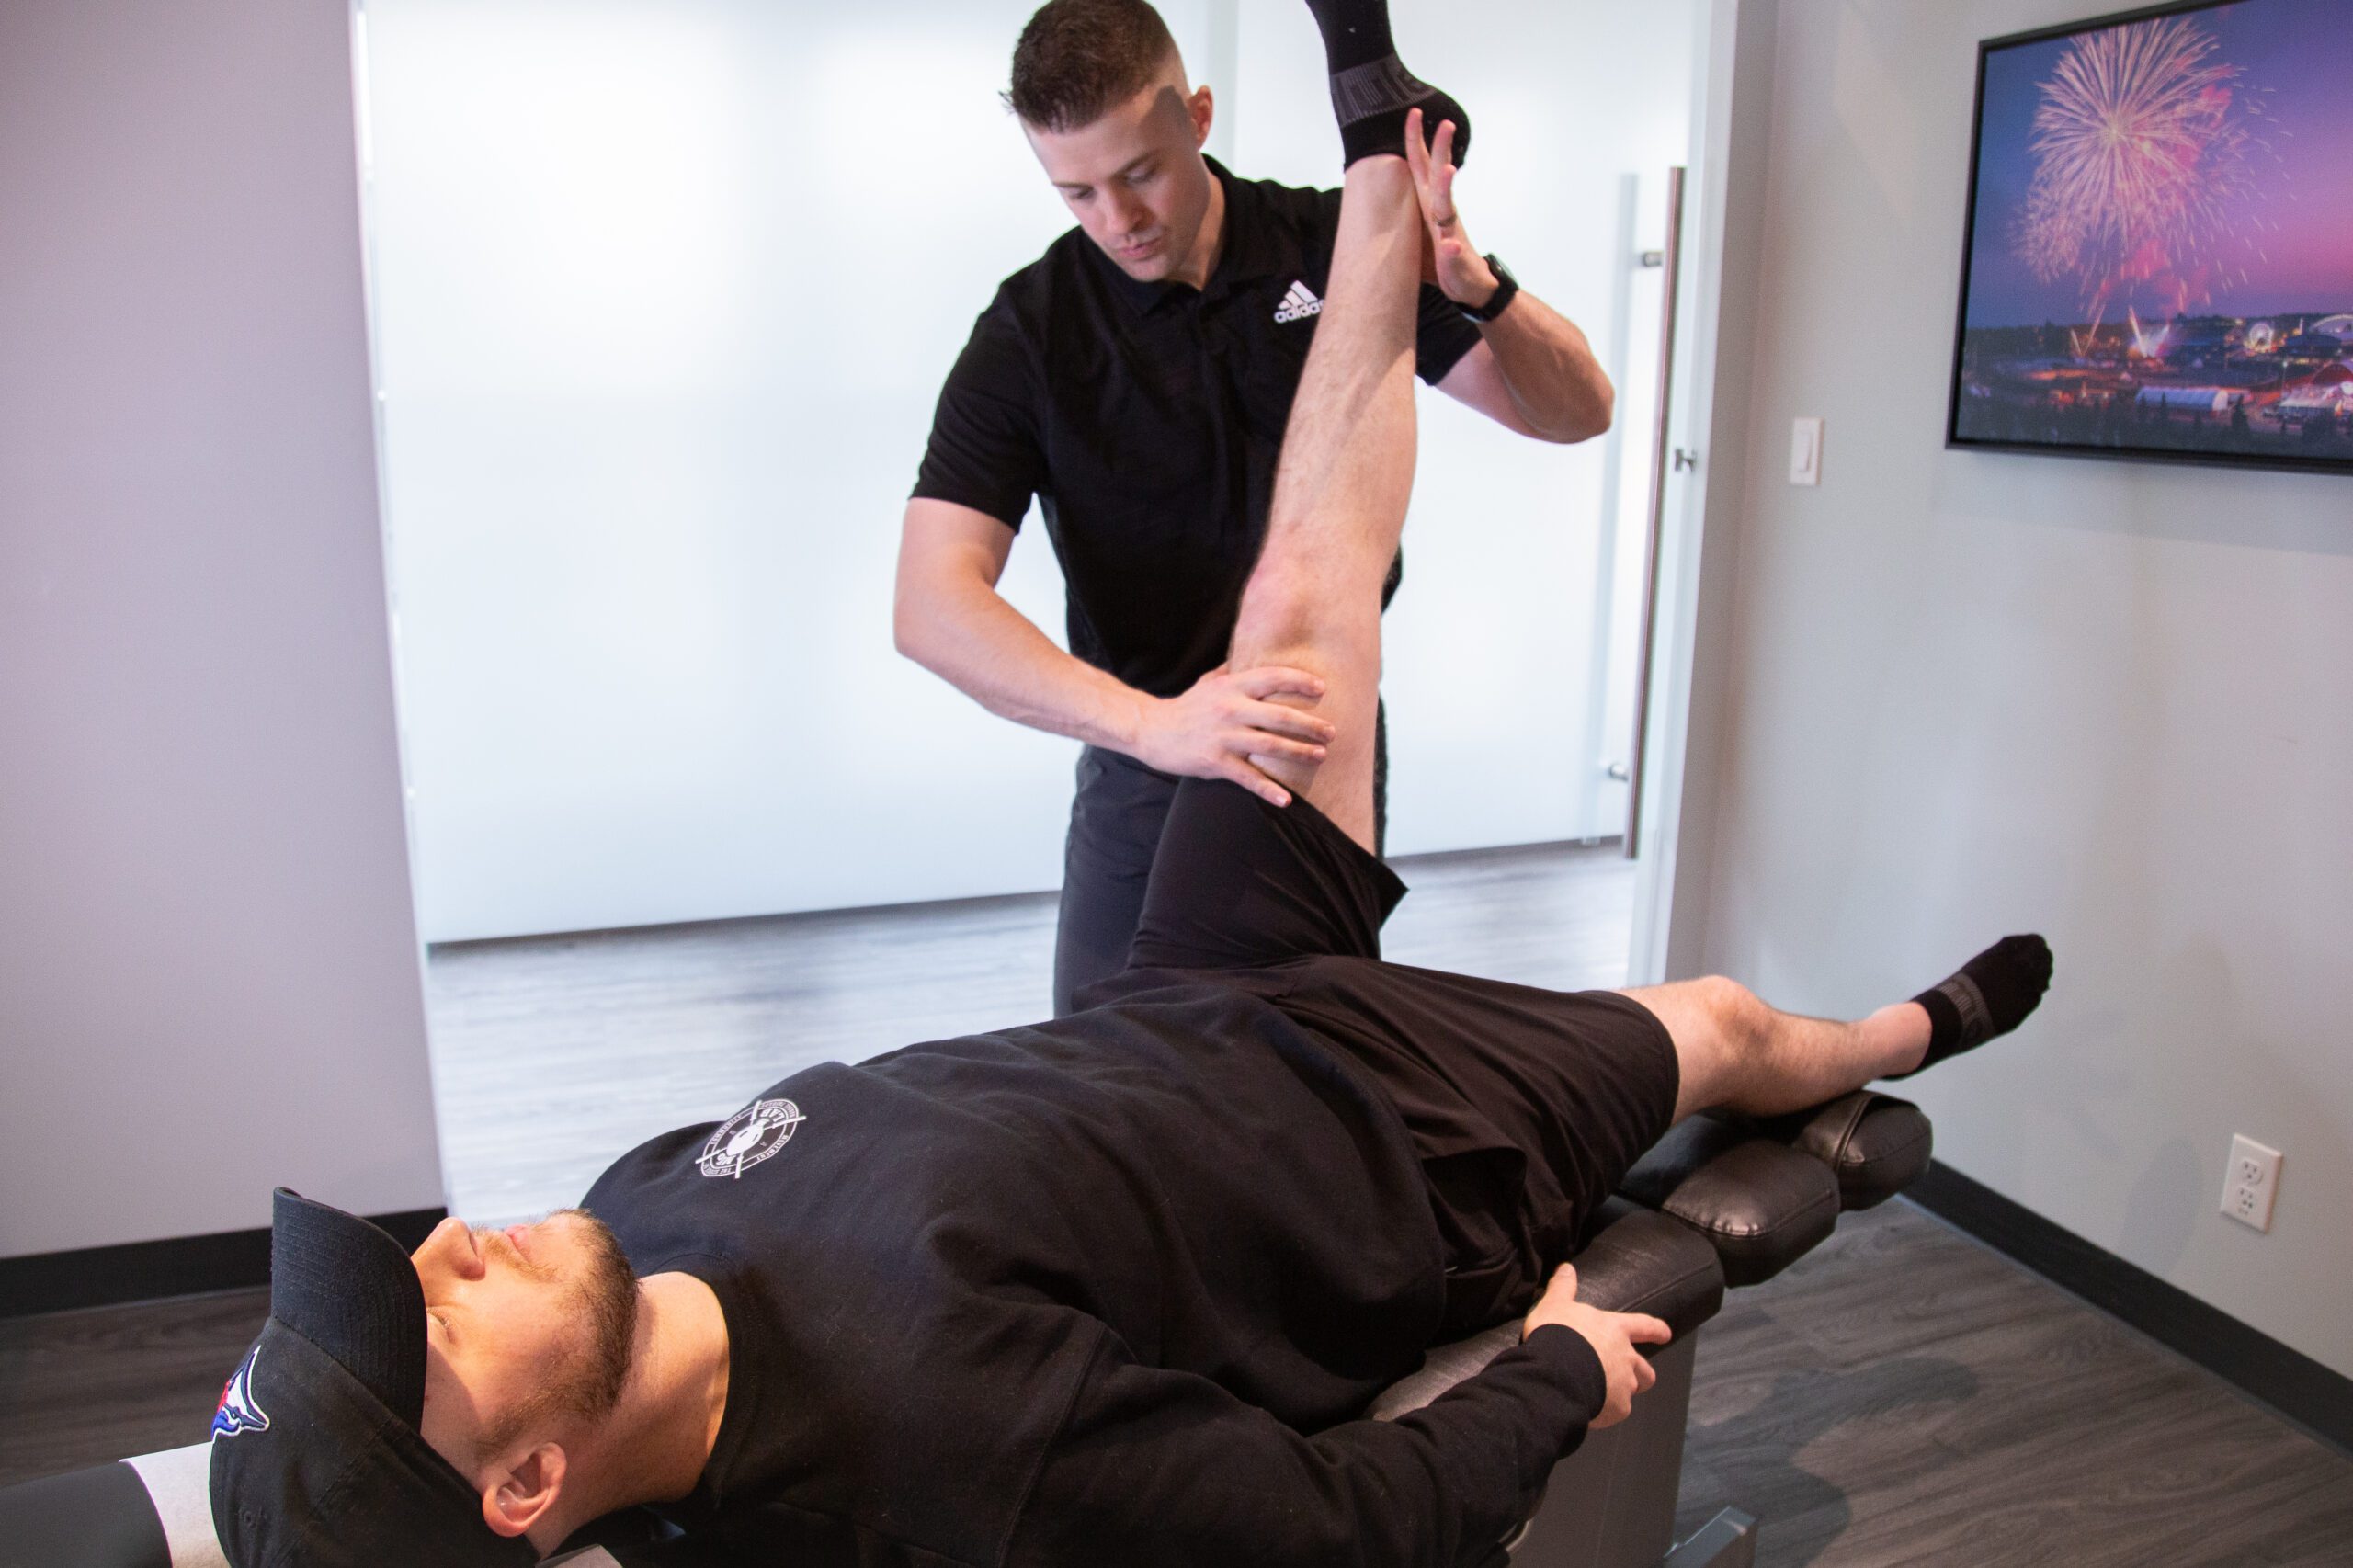 Manual therapy at myolab health and wellness.